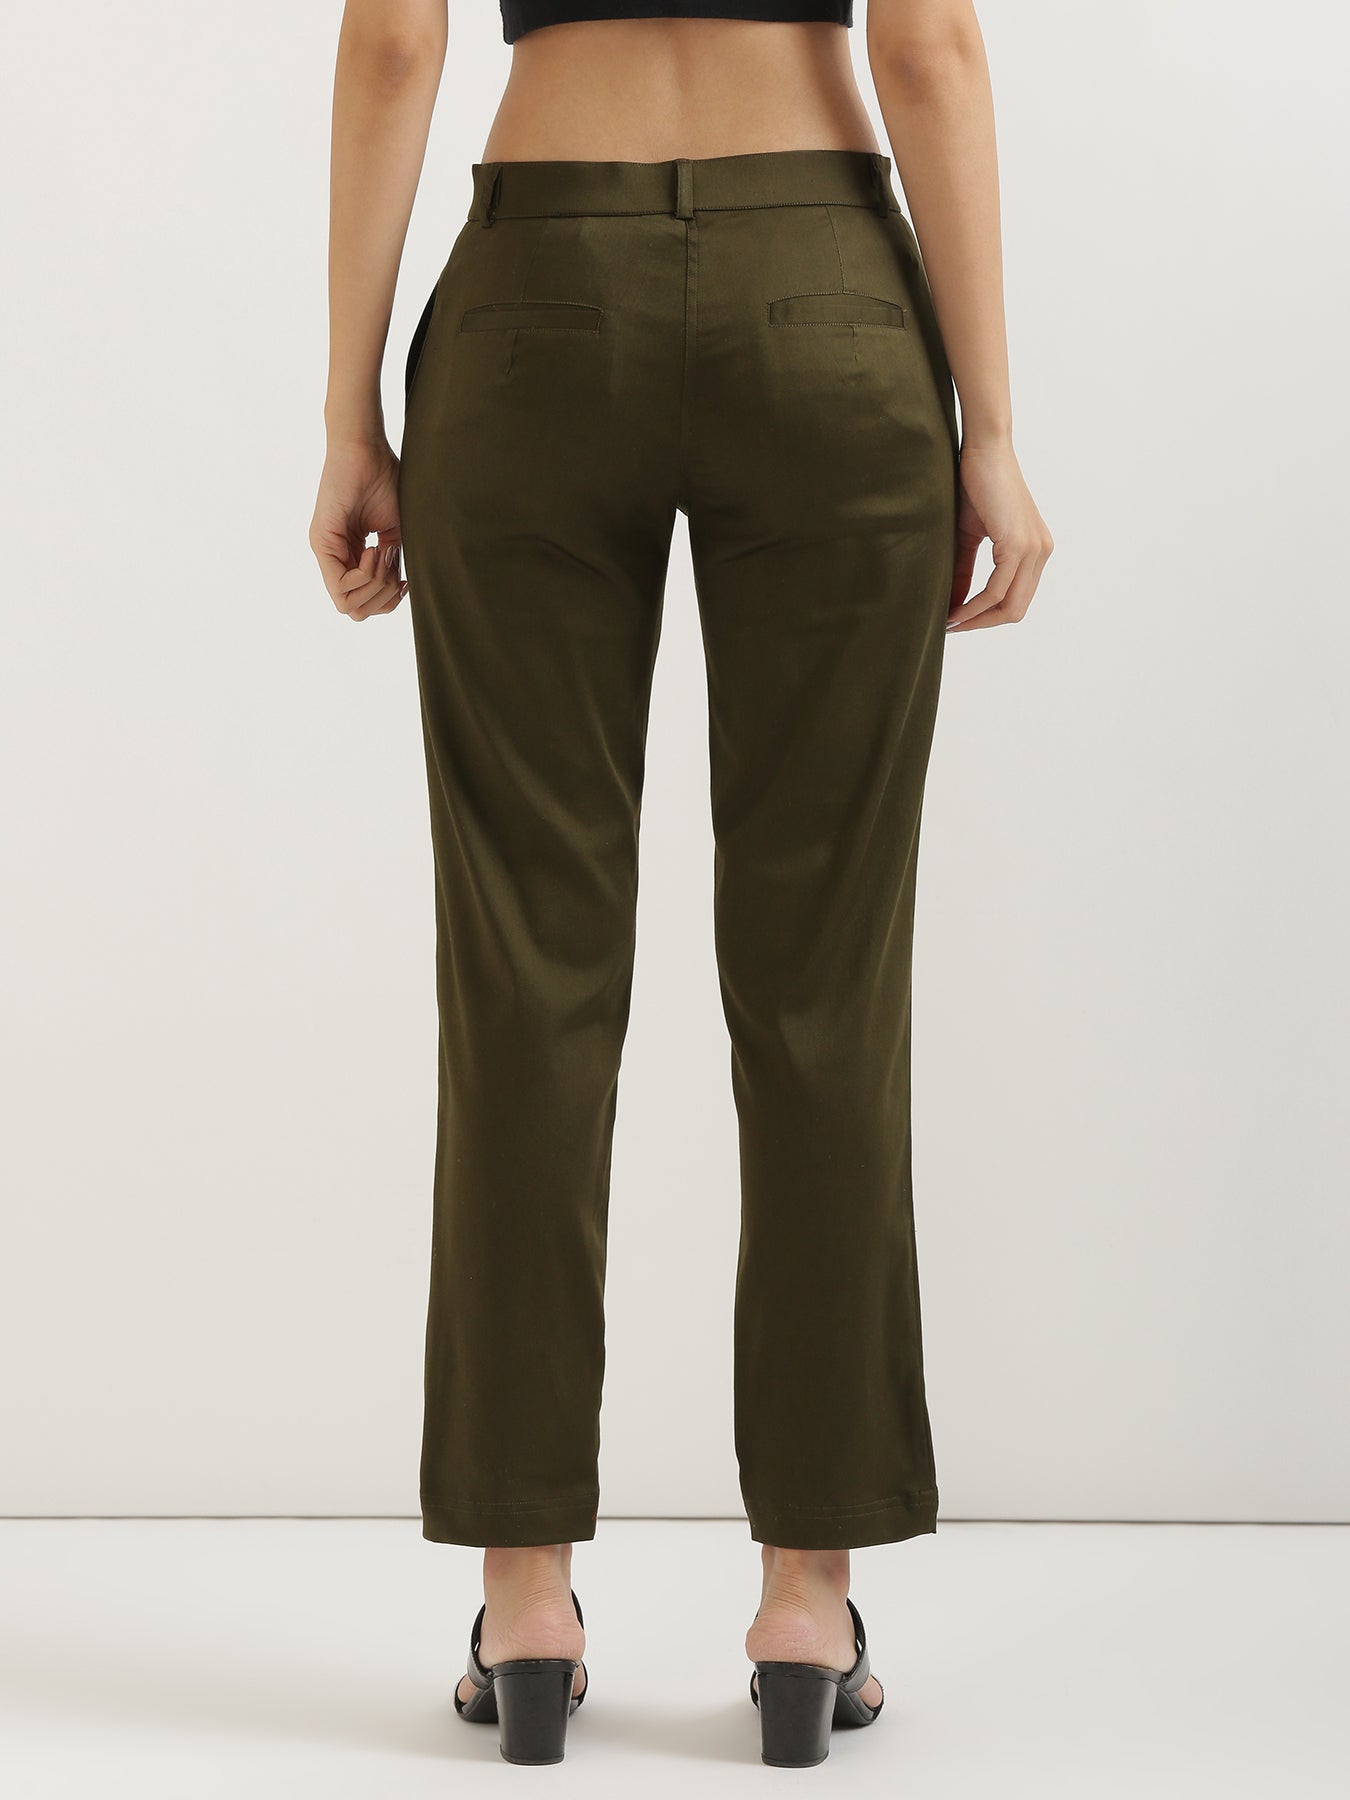 Stylish womens Trousers & Pants / Cigarette Pent for women, Mehndiya Olive  Green Ladies Pant (Olive)